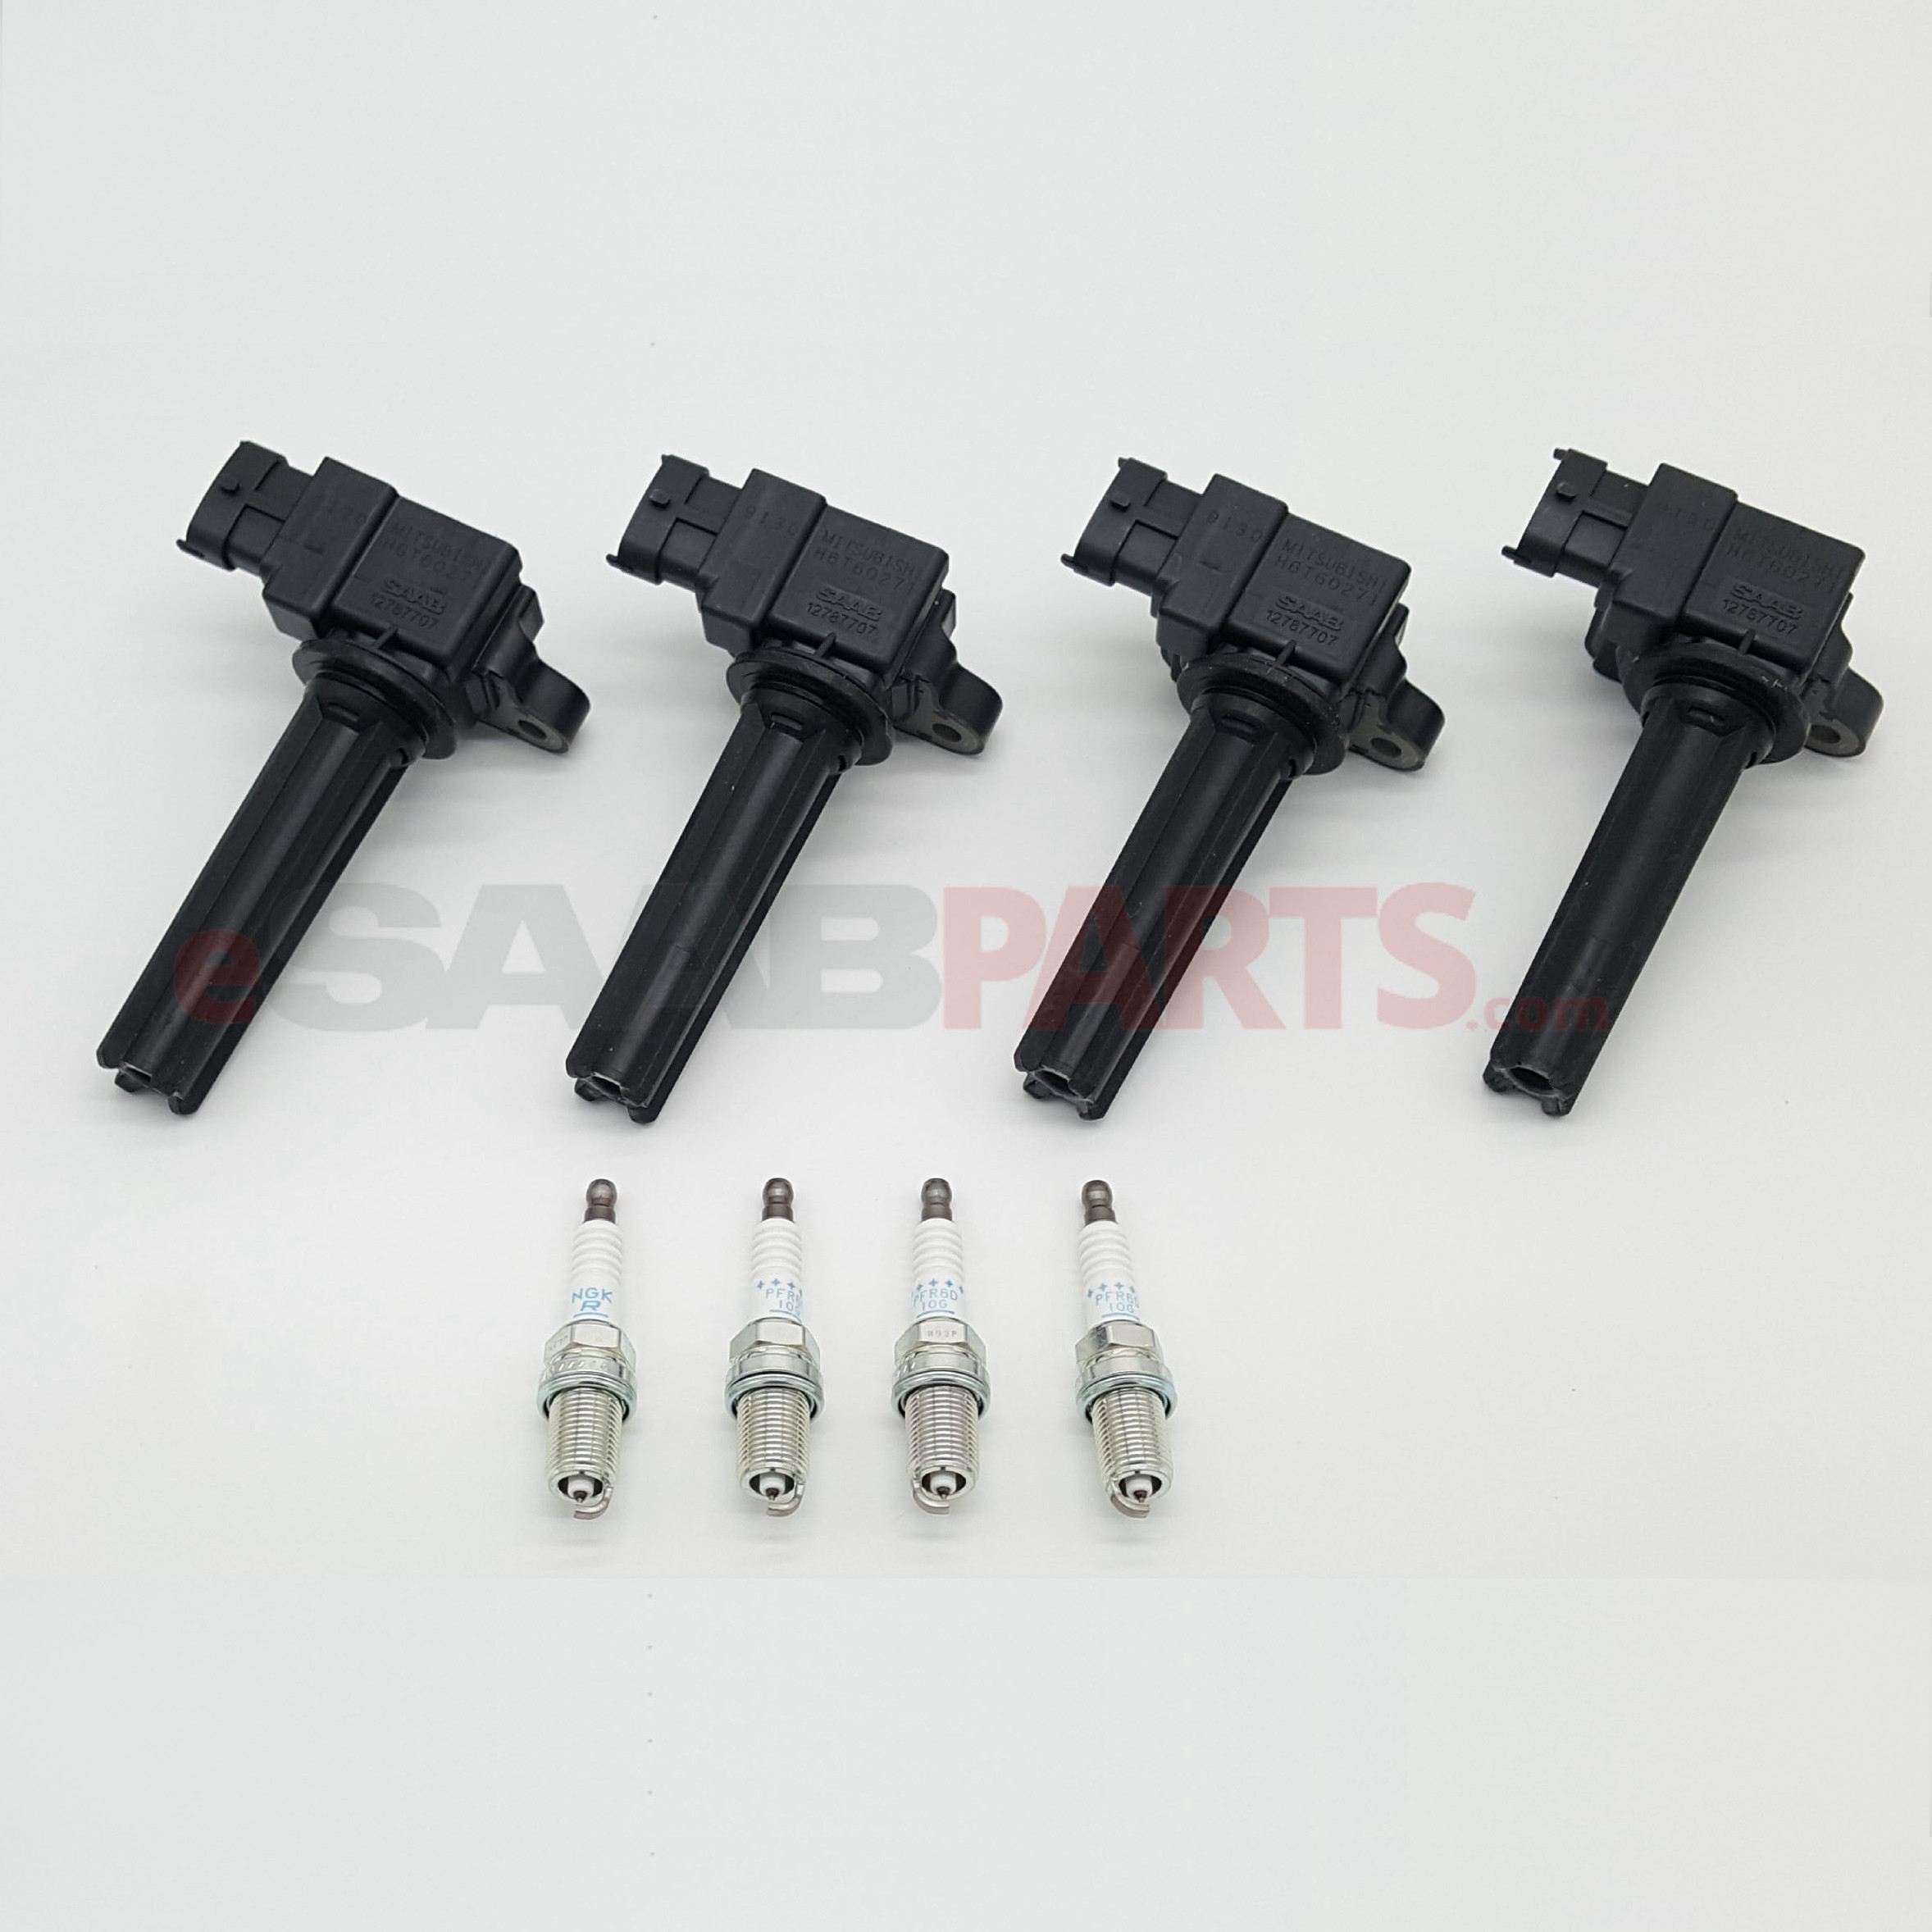 Officials particle Lovely 12440084] SAAB Ignition Coil & Spark Plug Kit - Set of 4 (B207 9-3) - Saab  Parts from eSaabParts.com